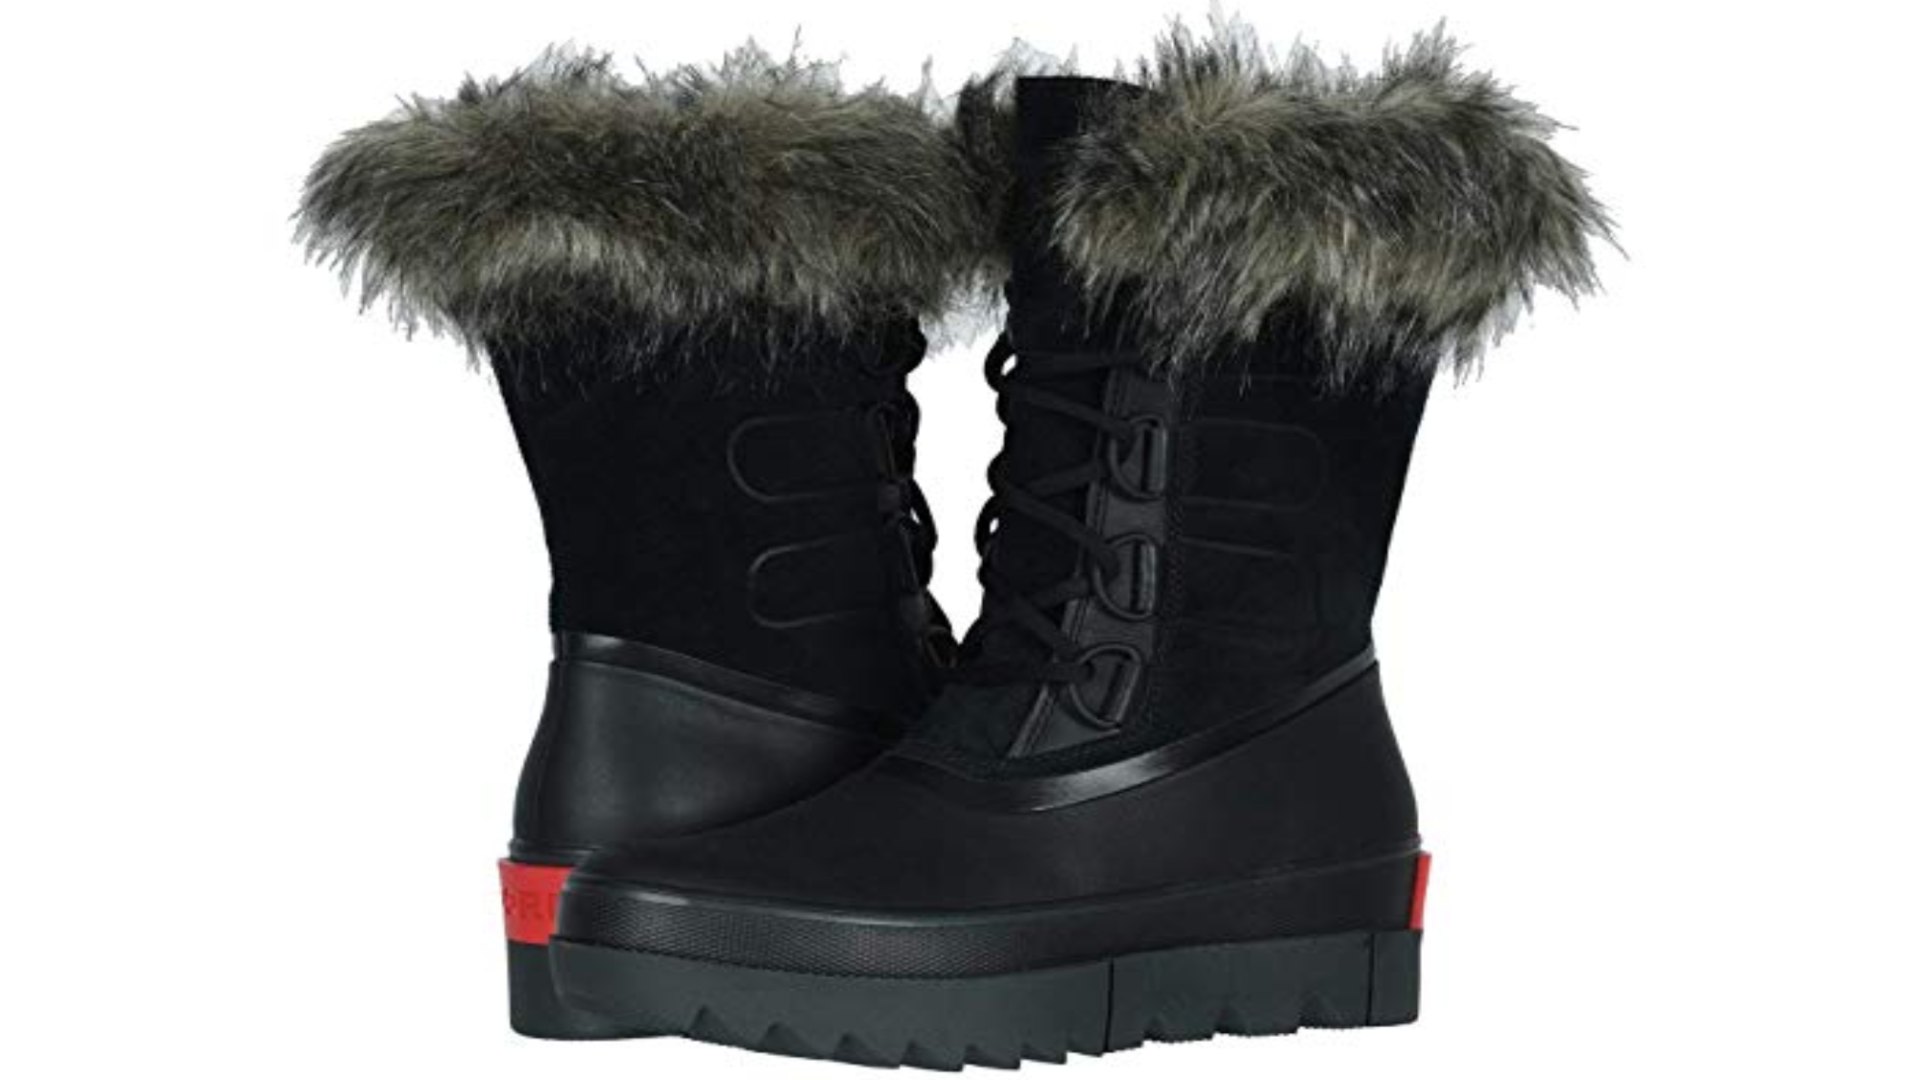 Update Your Wardrobe with This Boot That Looks and Feels 'So Warm' | Us ...